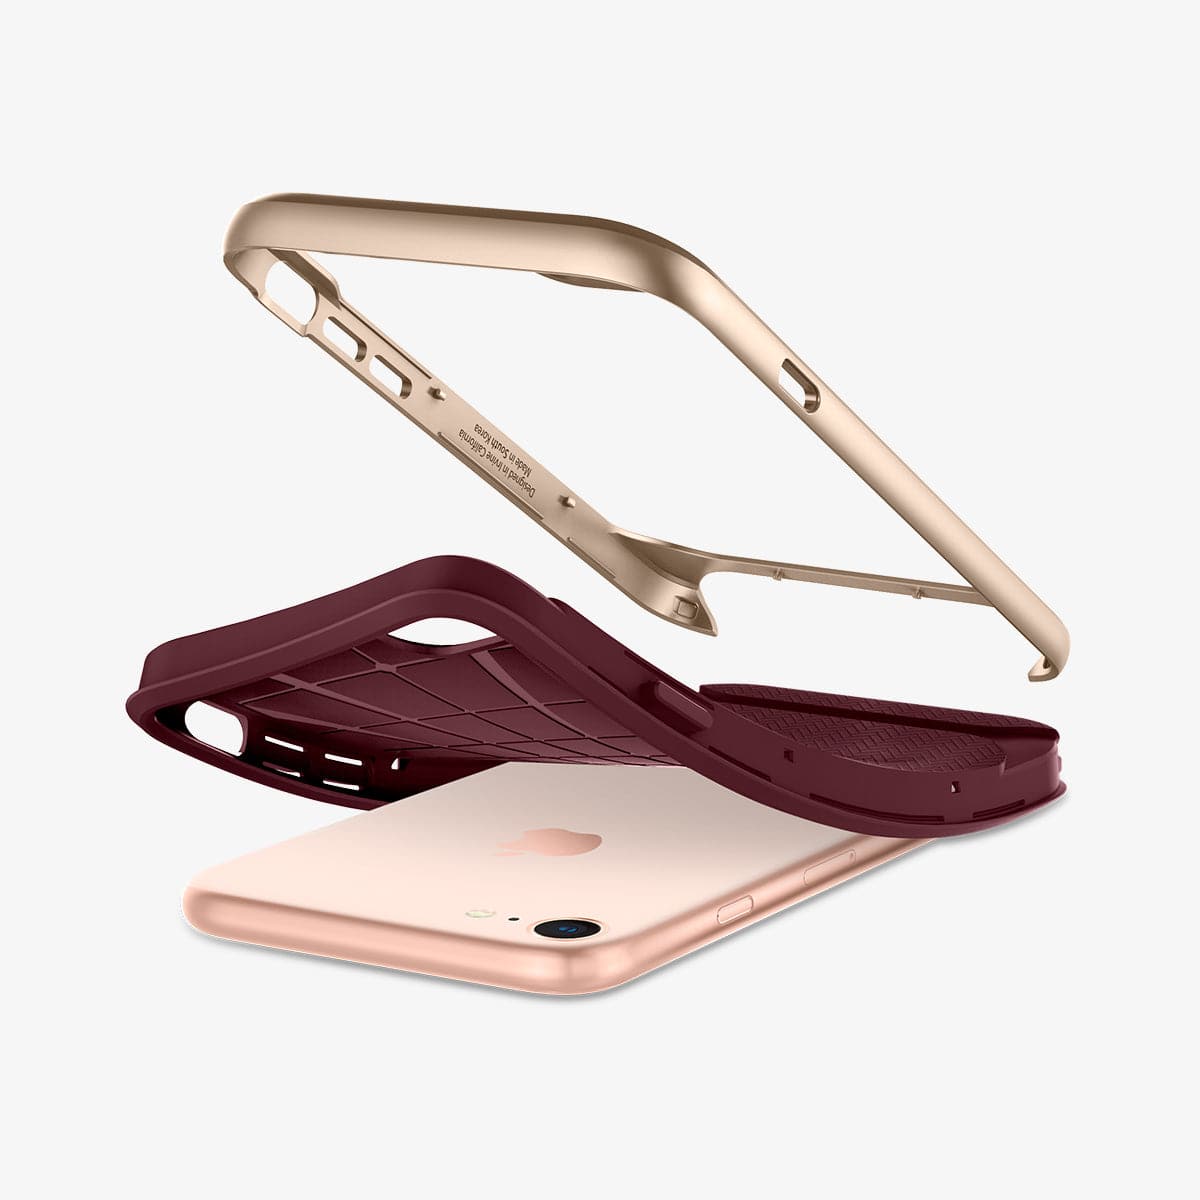 054CS22198 - iPhone 7 Series Neo Hybrid Herringbone Case in Burgundy showing the hard frame hovering above the back case, slightly peeled off from device